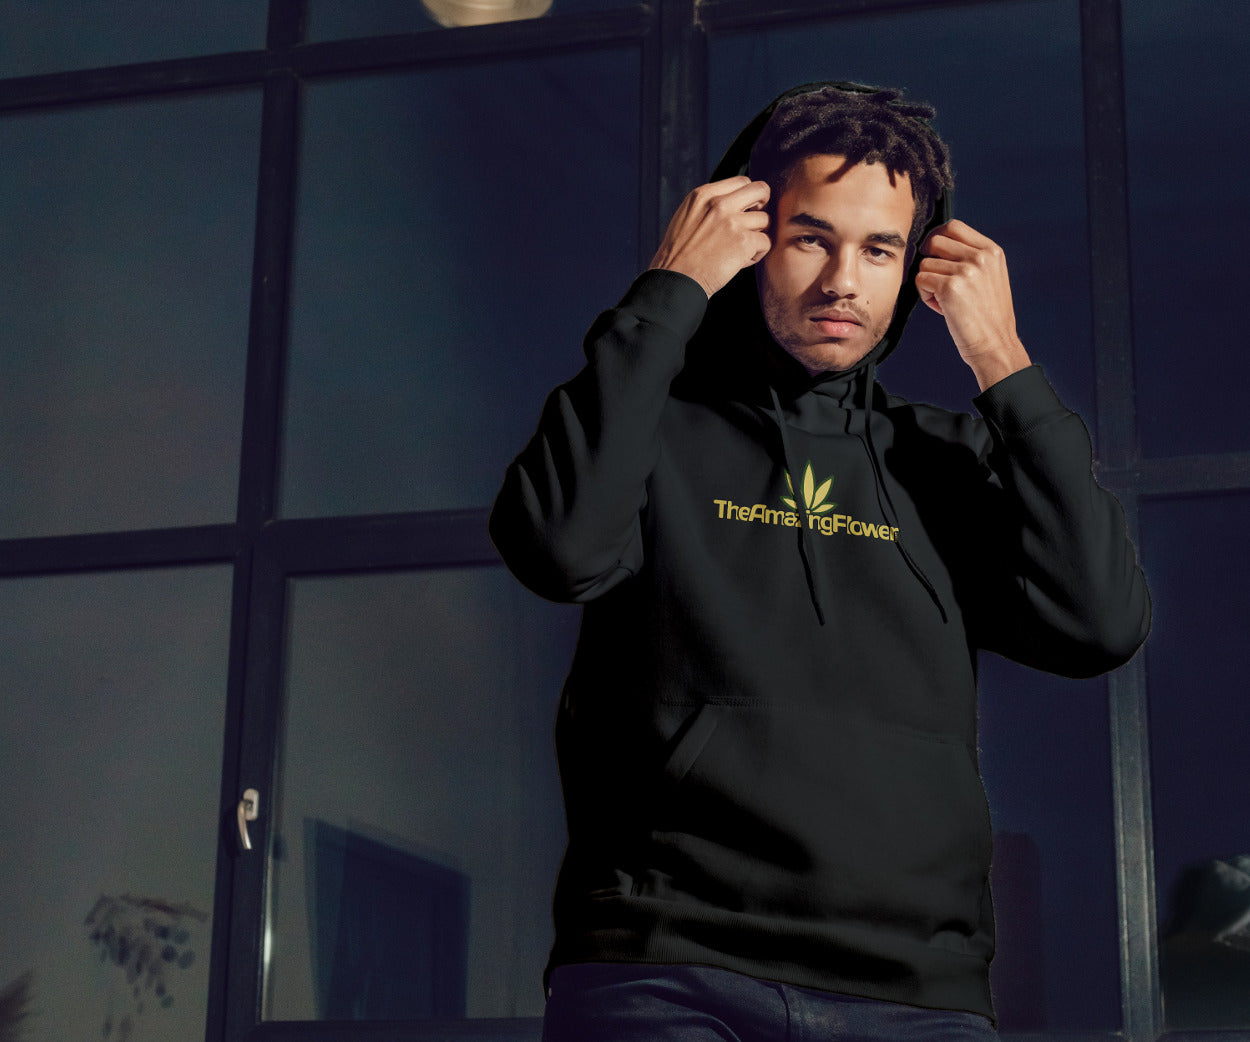 Old Gold Hemp Leaf Logo Pullover Hoodie in black worn by a man in front of an office pulling his hood up while looking at the camera.